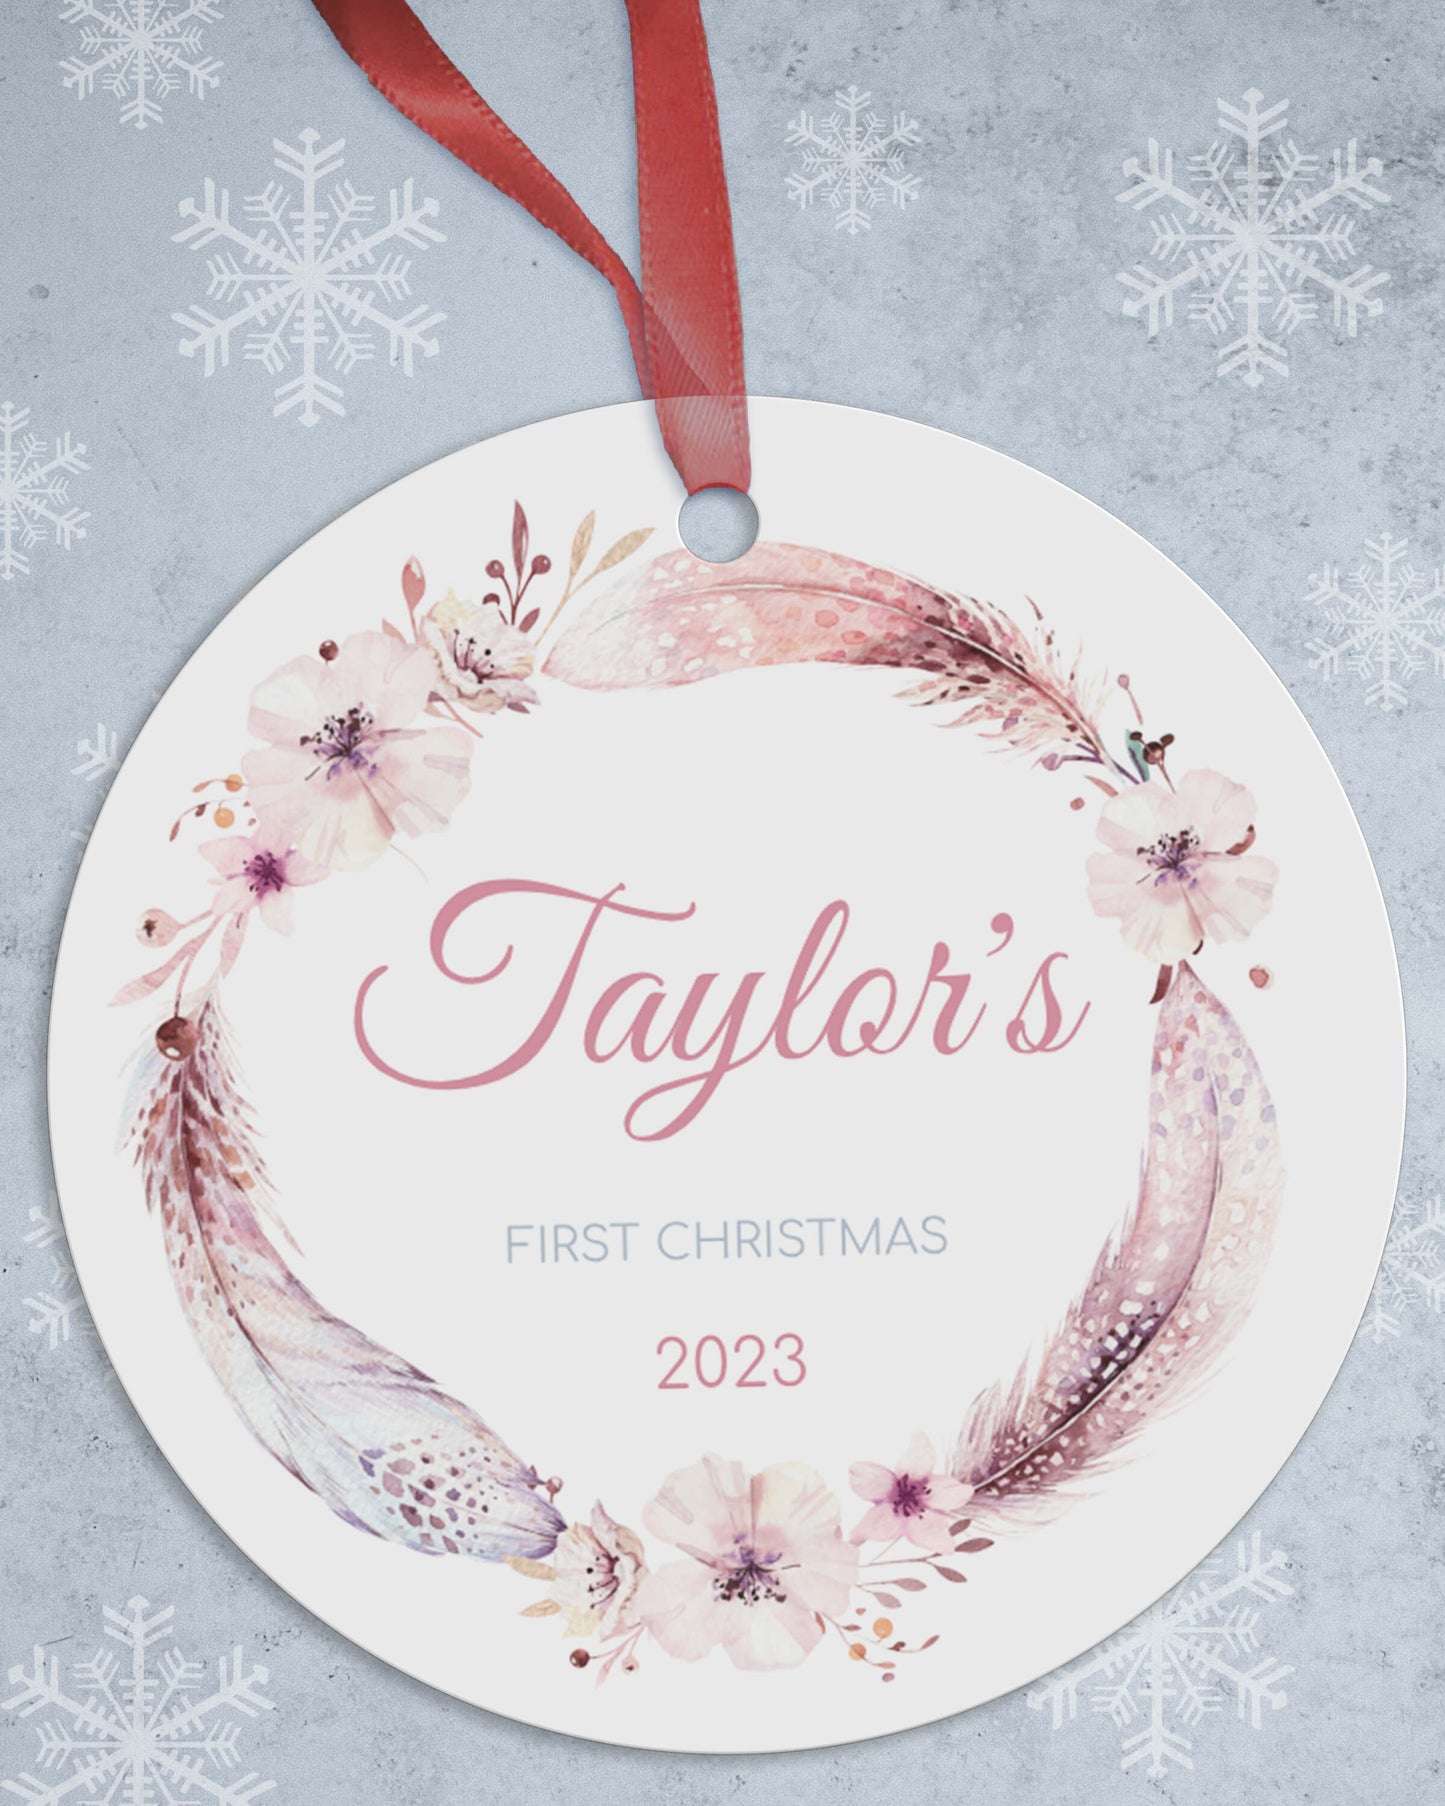 Feather Christmas Ornaments: Personalized Elegance